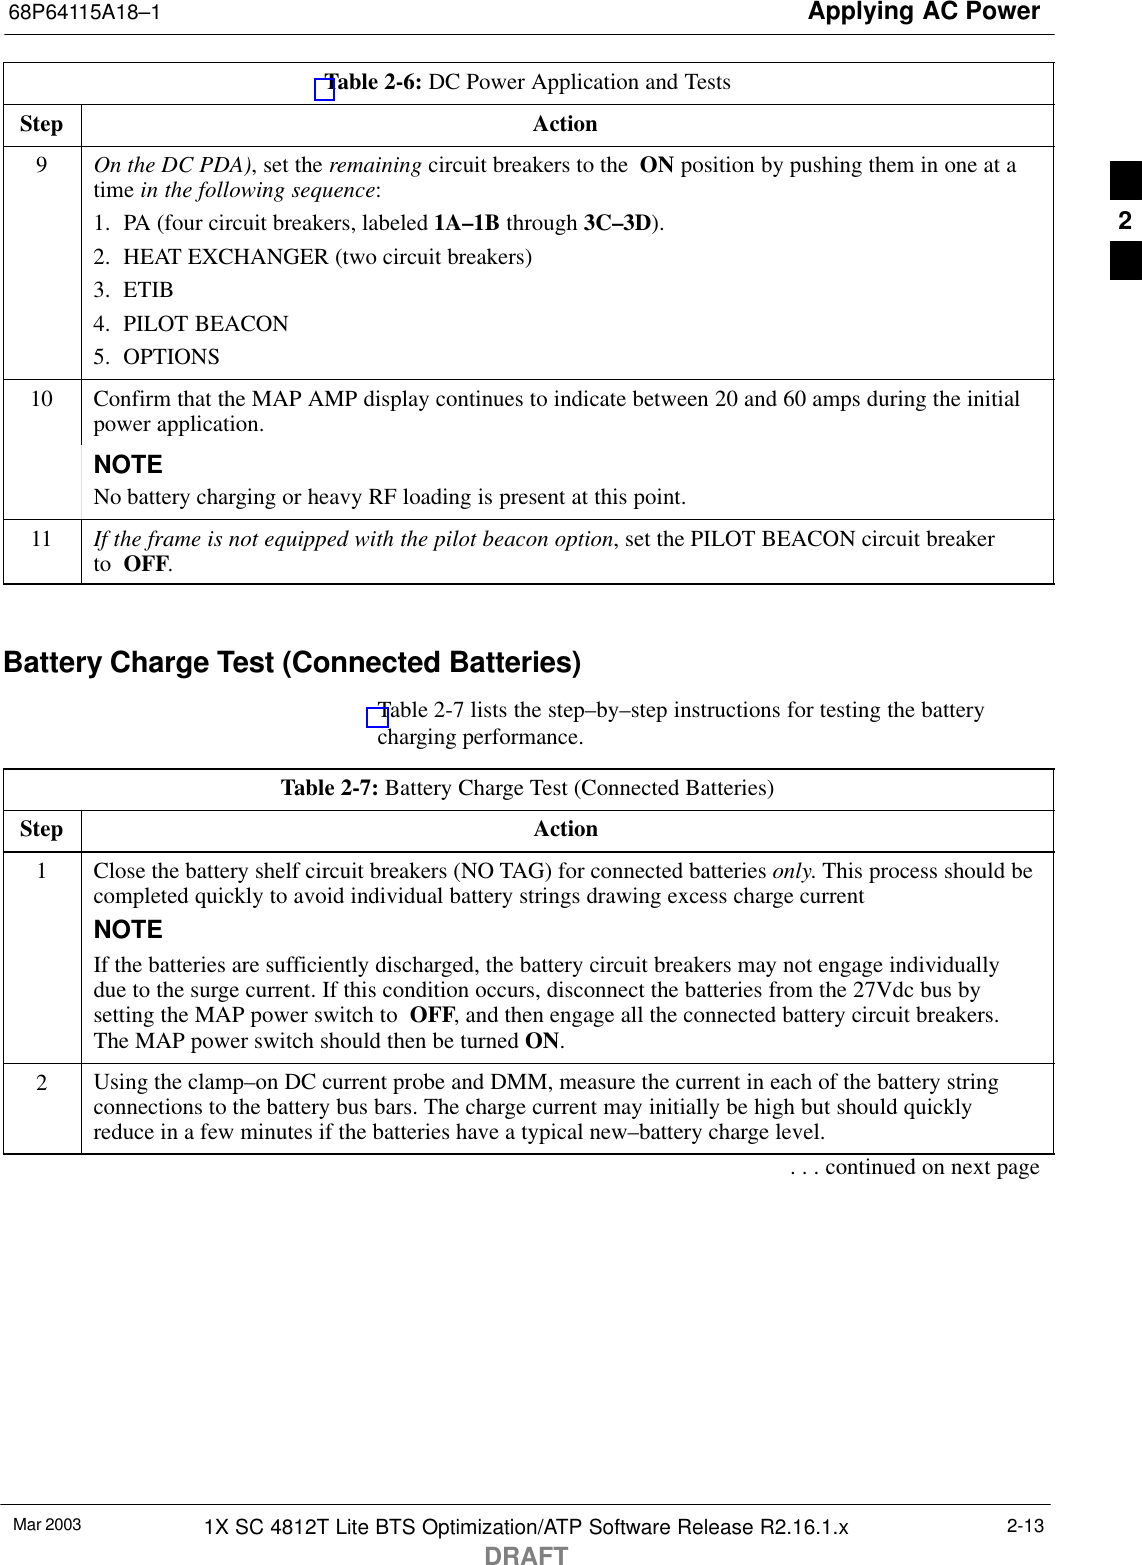 Applying AC Power68P64115A18–1Mar 2003 1X SC 4812T Lite BTS Optimization/ATP Software Release R2.16.1.xDRAFT2-13Table 2-6: DC Power Application and TestsStep Action9On the DC PDA), set the remaining circuit breakers to the  ON position by pushing them in one at atime in the following sequence:1. PA (four circuit breakers, labeled 1A–1B through 3C–3D).2. HEAT EXCHANGER (two circuit breakers)3. ETIB4. PILOT BEACON5. OPTIONS10 Confirm that the MAP AMP display continues to indicate between 20 and 60 amps during the initialpower application.NOTENo battery charging or heavy RF loading is present at this point.11 If the frame is not equipped with the pilot beacon option, set the PILOT BEACON circuit breaker to  OFF. Battery Charge Test (Connected Batteries)Table 2-7 lists the step–by–step instructions for testing the batterycharging performance.Table 2-7: Battery Charge Test (Connected Batteries)Step Action1Close the battery shelf circuit breakers (NO TAG) for connected batteries only. This process should becompleted quickly to avoid individual battery strings drawing excess charge currentNOTEIf the batteries are sufficiently discharged, the battery circuit breakers may not engage individuallydue to the surge current. If this condition occurs, disconnect the batteries from the 27Vdc bus bysetting the MAP power switch to  OFF, and then engage all the connected battery circuit breakers.The MAP power switch should then be turned ON.2Using the clamp–on DC current probe and DMM, measure the current in each of the battery stringconnections to the battery bus bars. The charge current may initially be high but should quicklyreduce in a few minutes if the batteries have a typical new–battery charge level.. . . continued on next page2